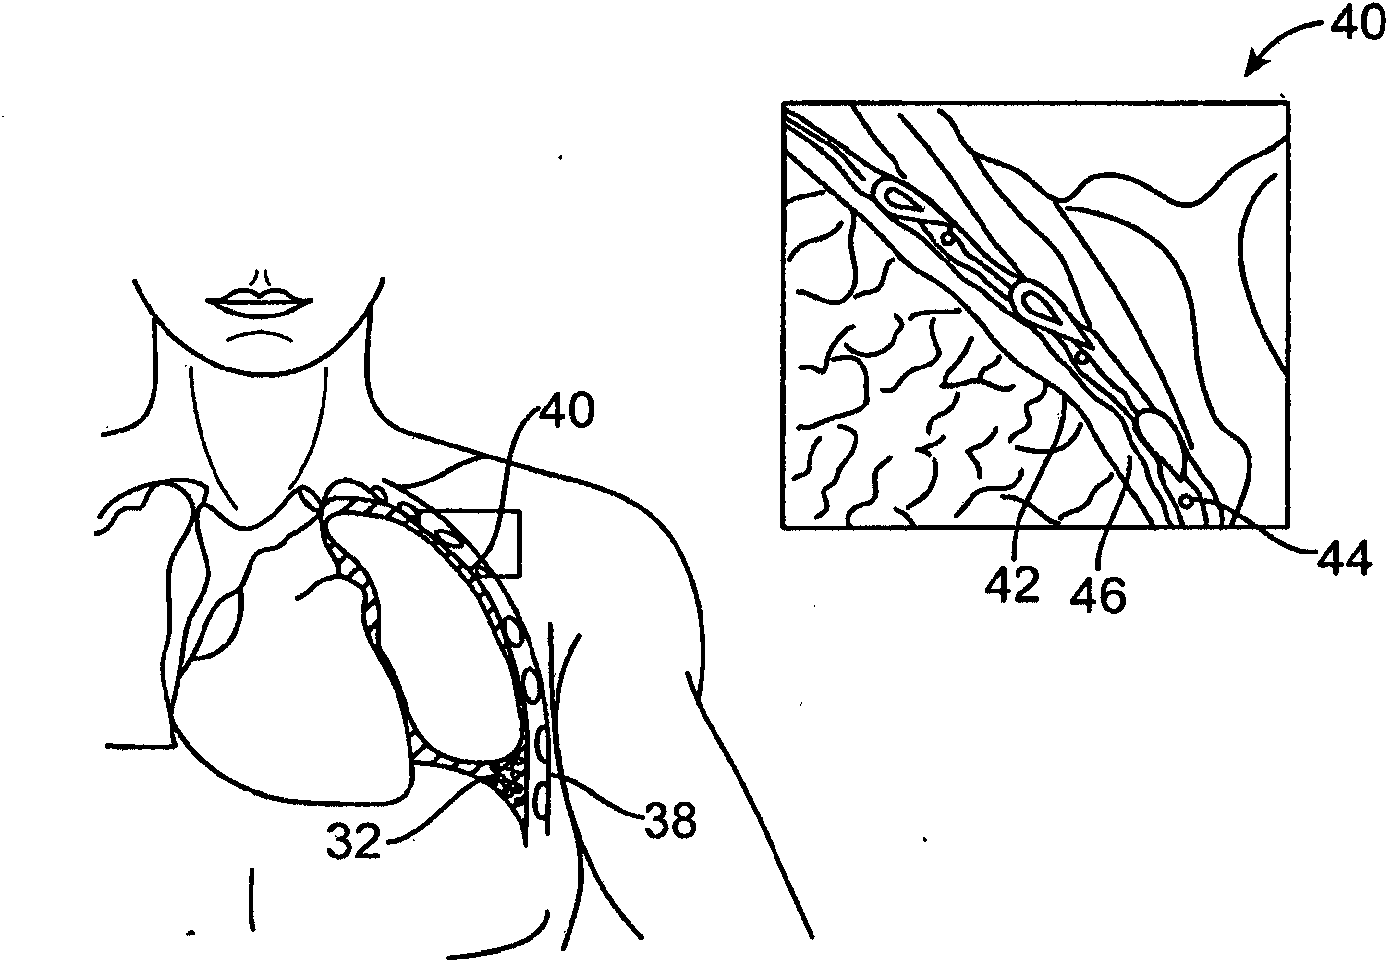 Cross-sectional modification during deployment of an elongate lung volume reduction device